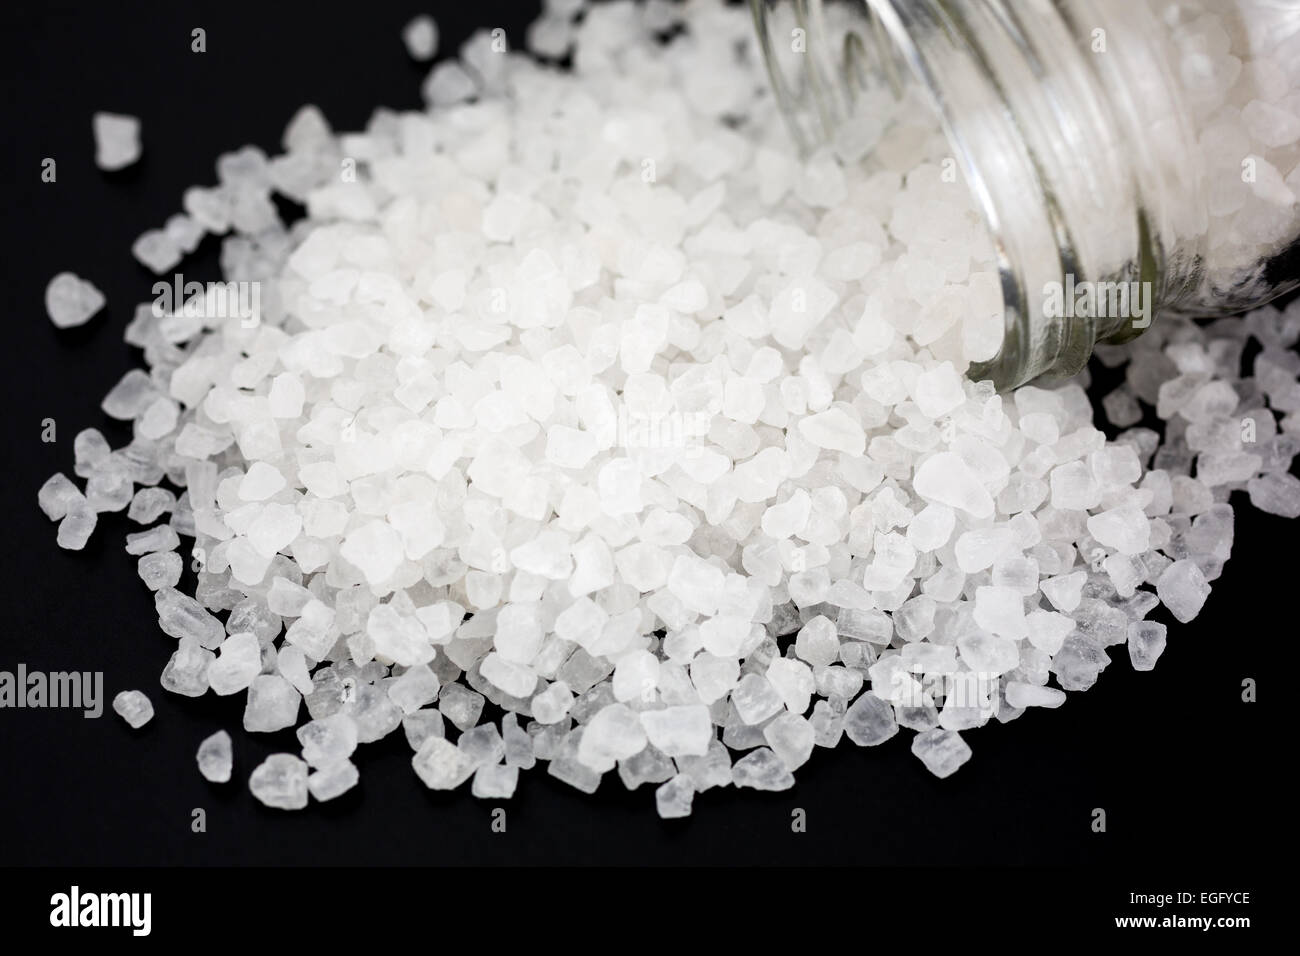 A glass container of sea salt spilling the large granules on to a black background. Stock Photo